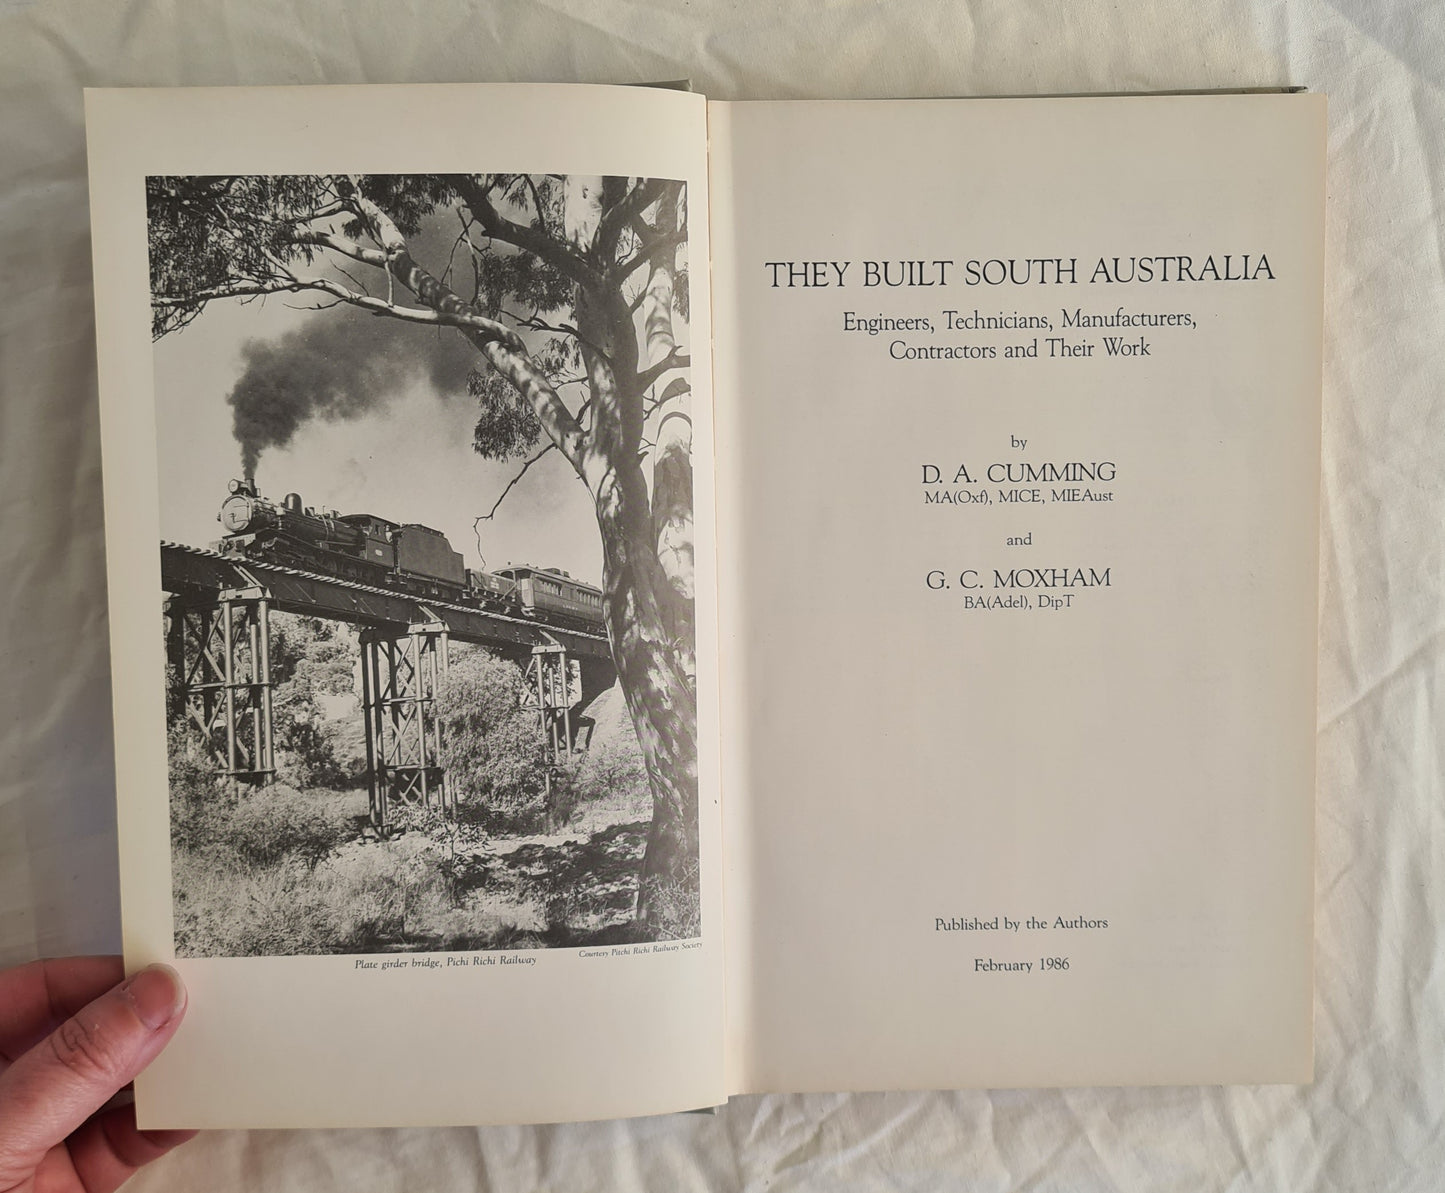 They Built South Australia by D. A. Cumming and G. C. Moxham